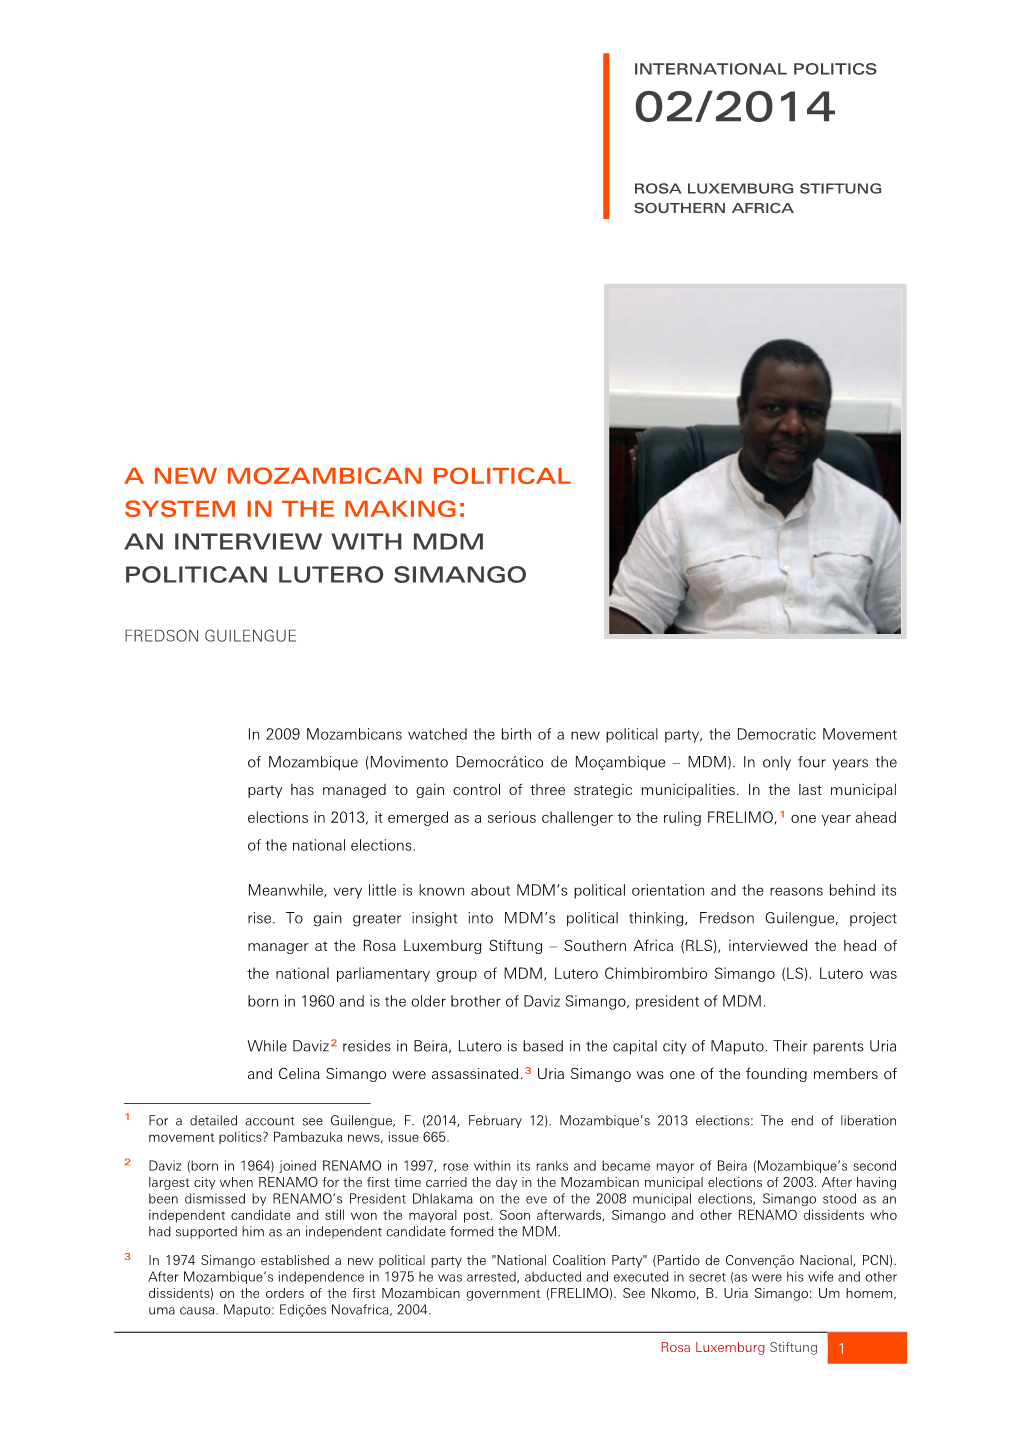 A New Mozambican Political System in the Making: an Interview with Mdm Politican Lutero Simango